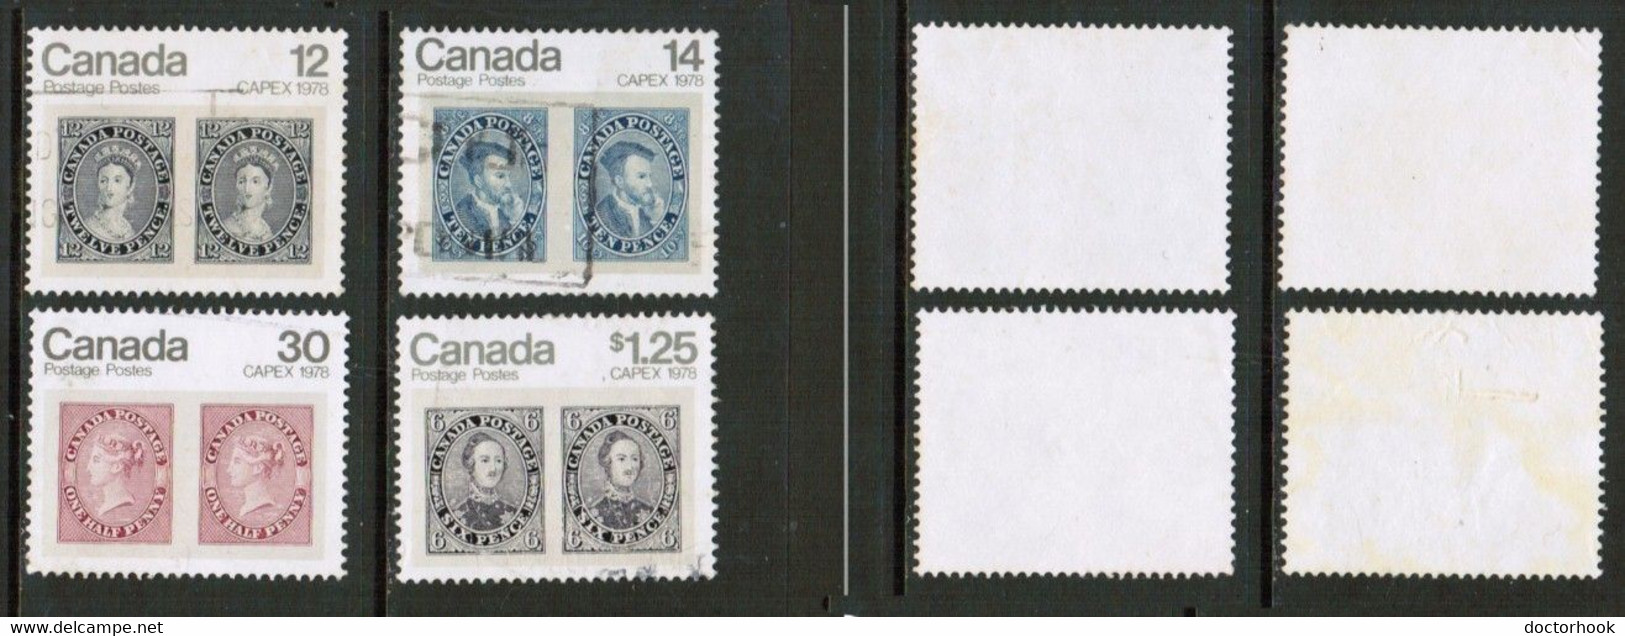 CANADA   Scott #753-6 USED (CONDITION AS PER SCAN) (WW-1-1) - Used Stamps